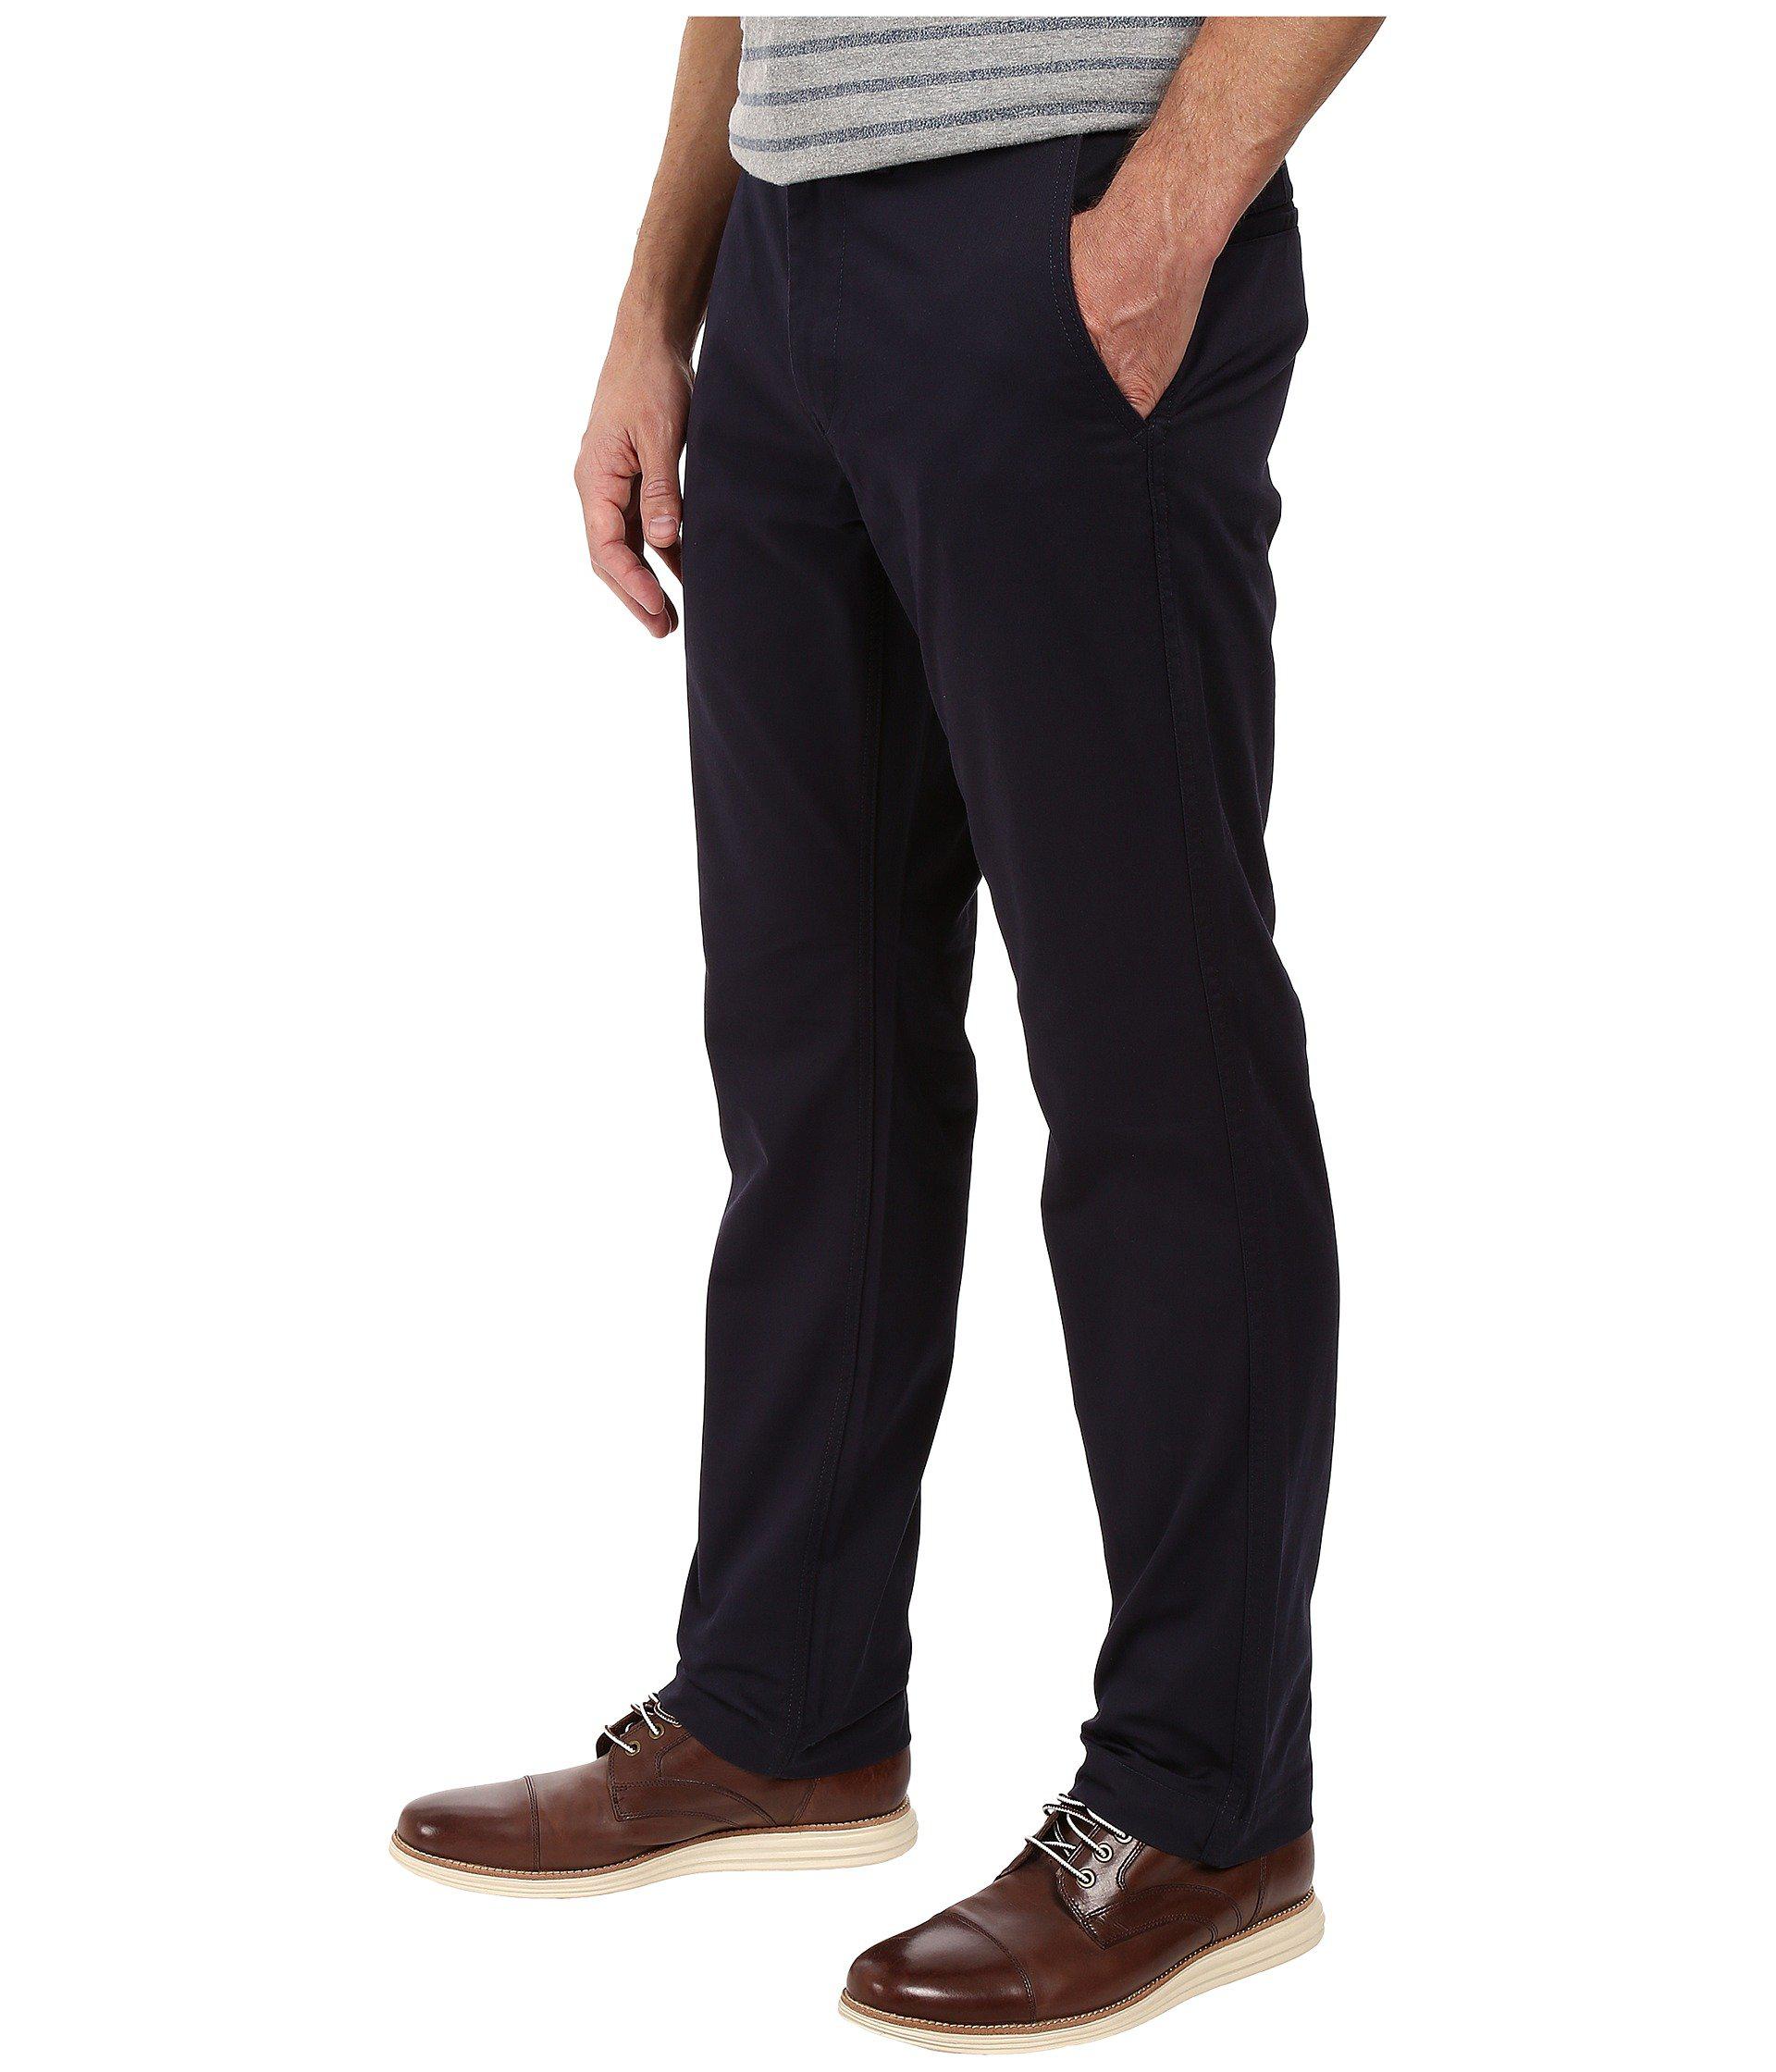 levi's athletic fit chinos